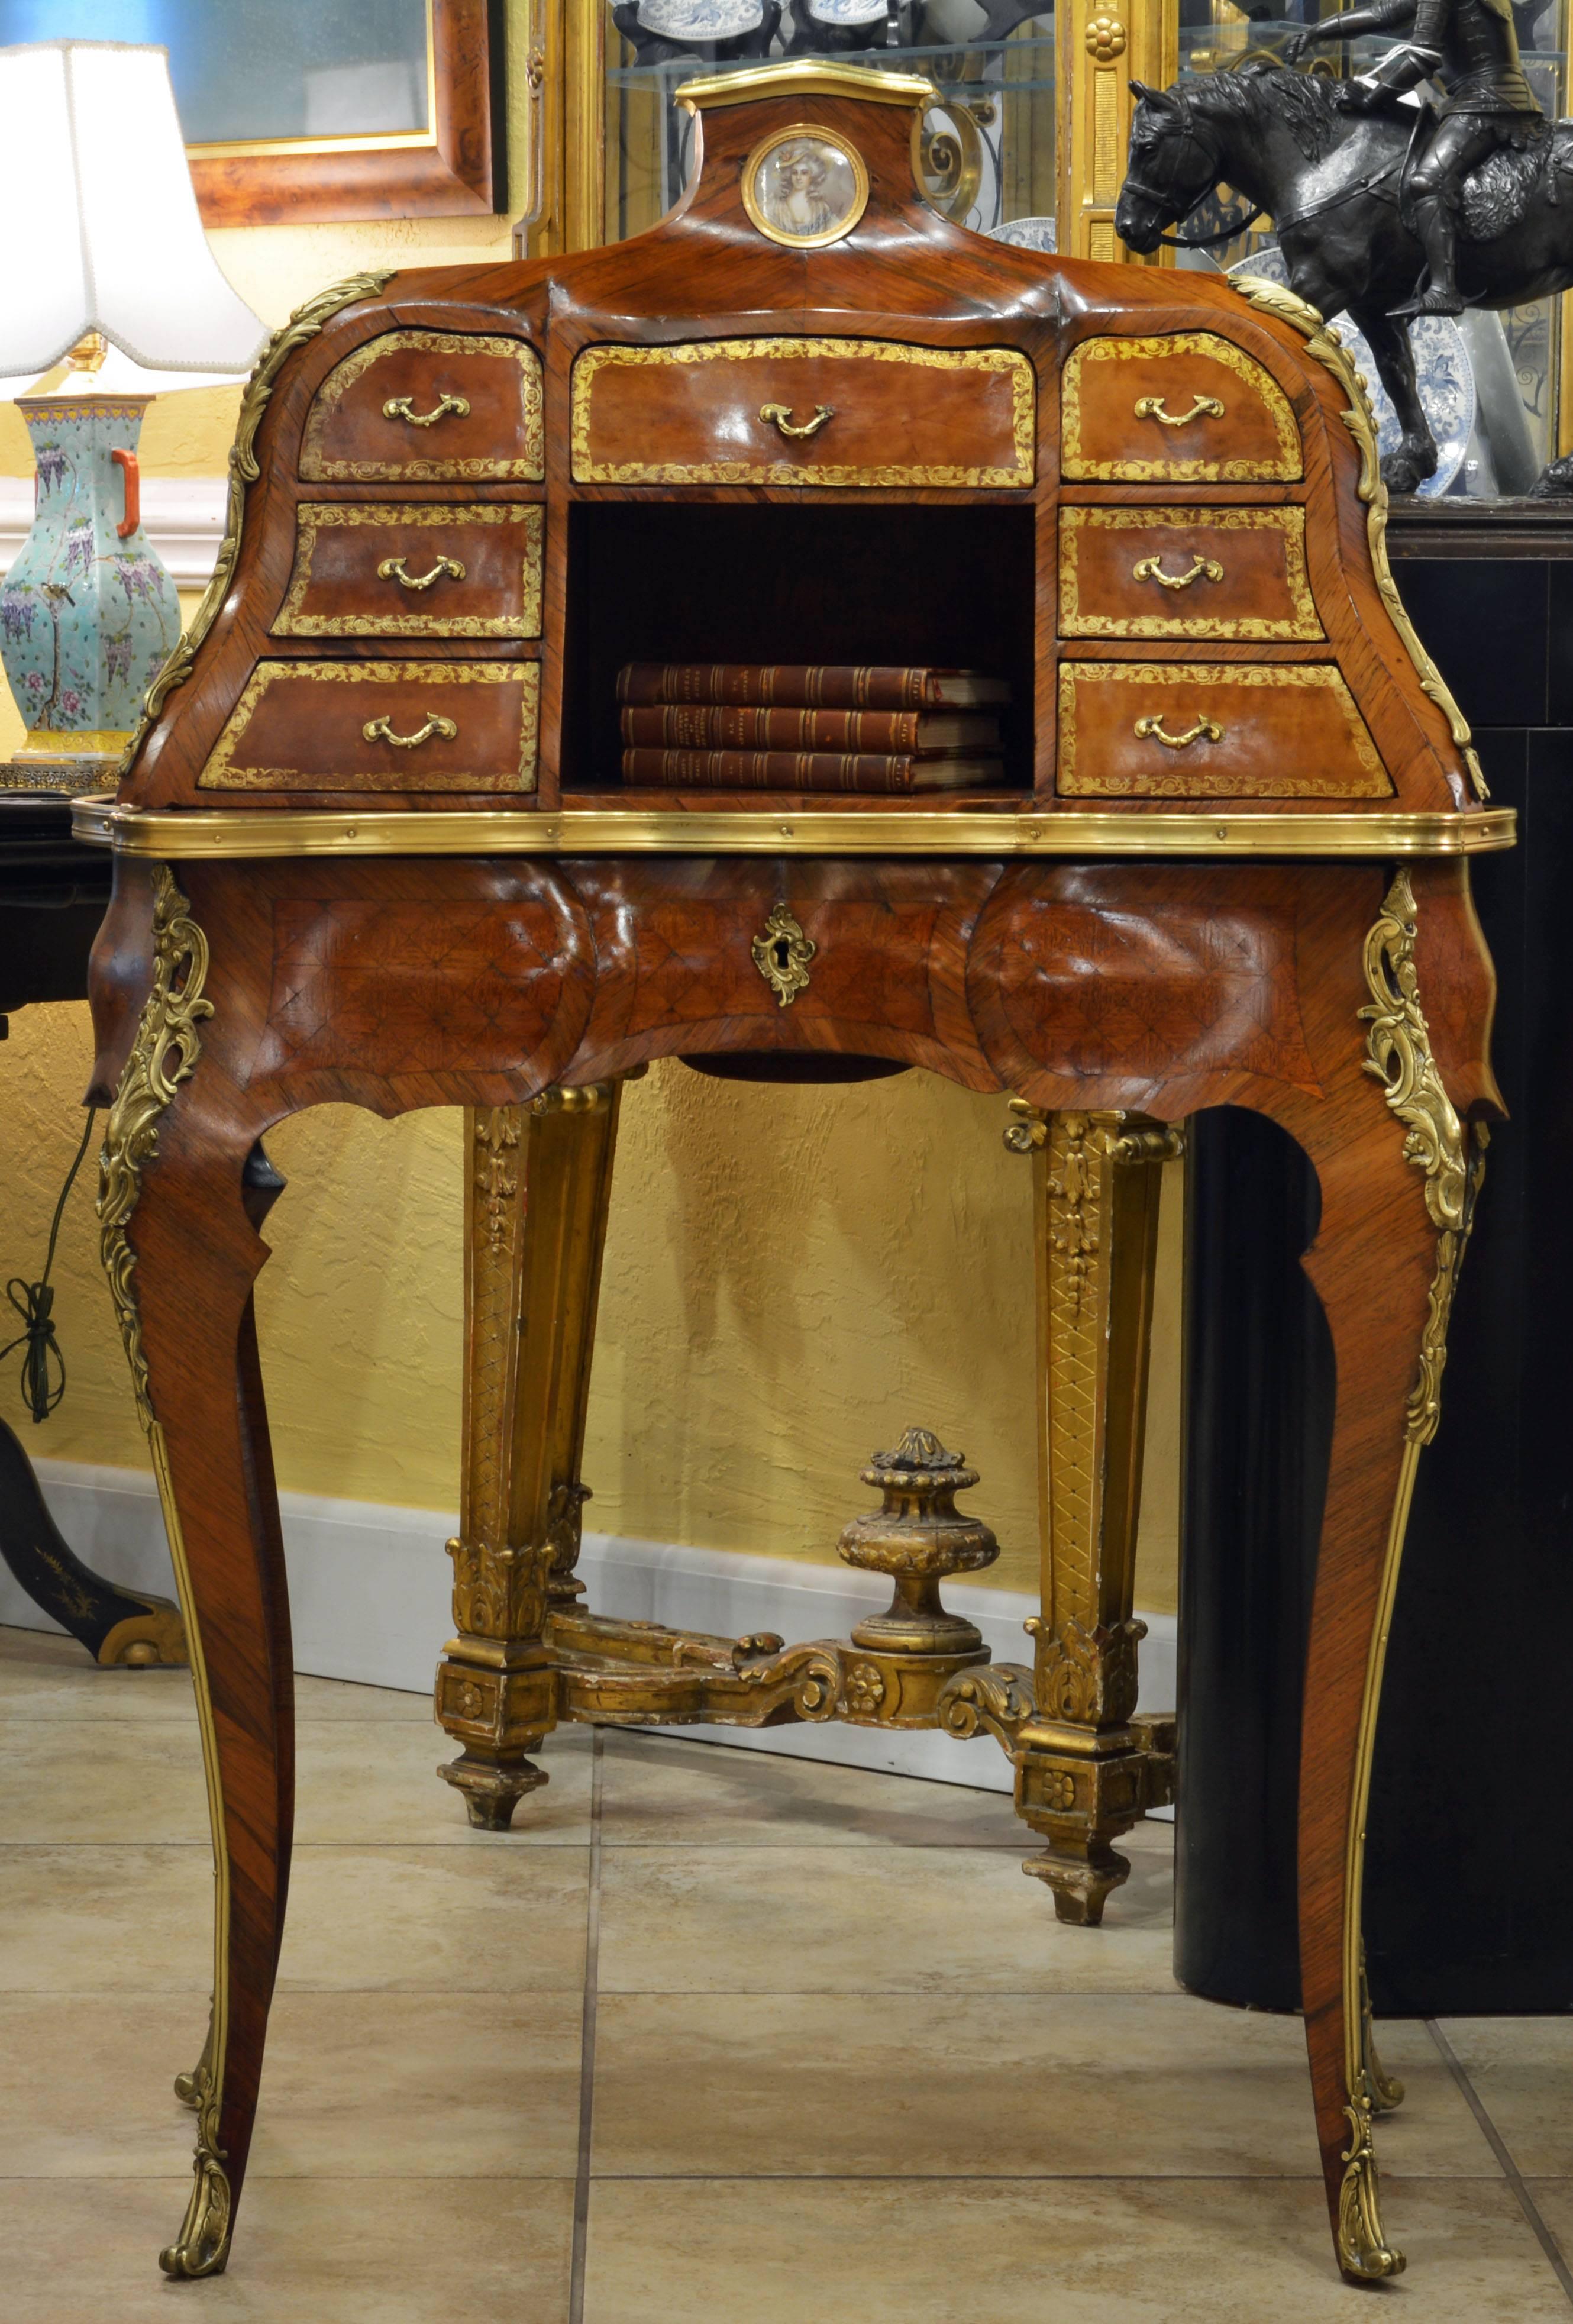 This excellent French Louis XV style bureau à gradin or ladies writing desk features an upper curved and shaped structure surmounted by a miniature portrait on ivory above seven gilt=leather fronted small drawers centering an open compartment. The